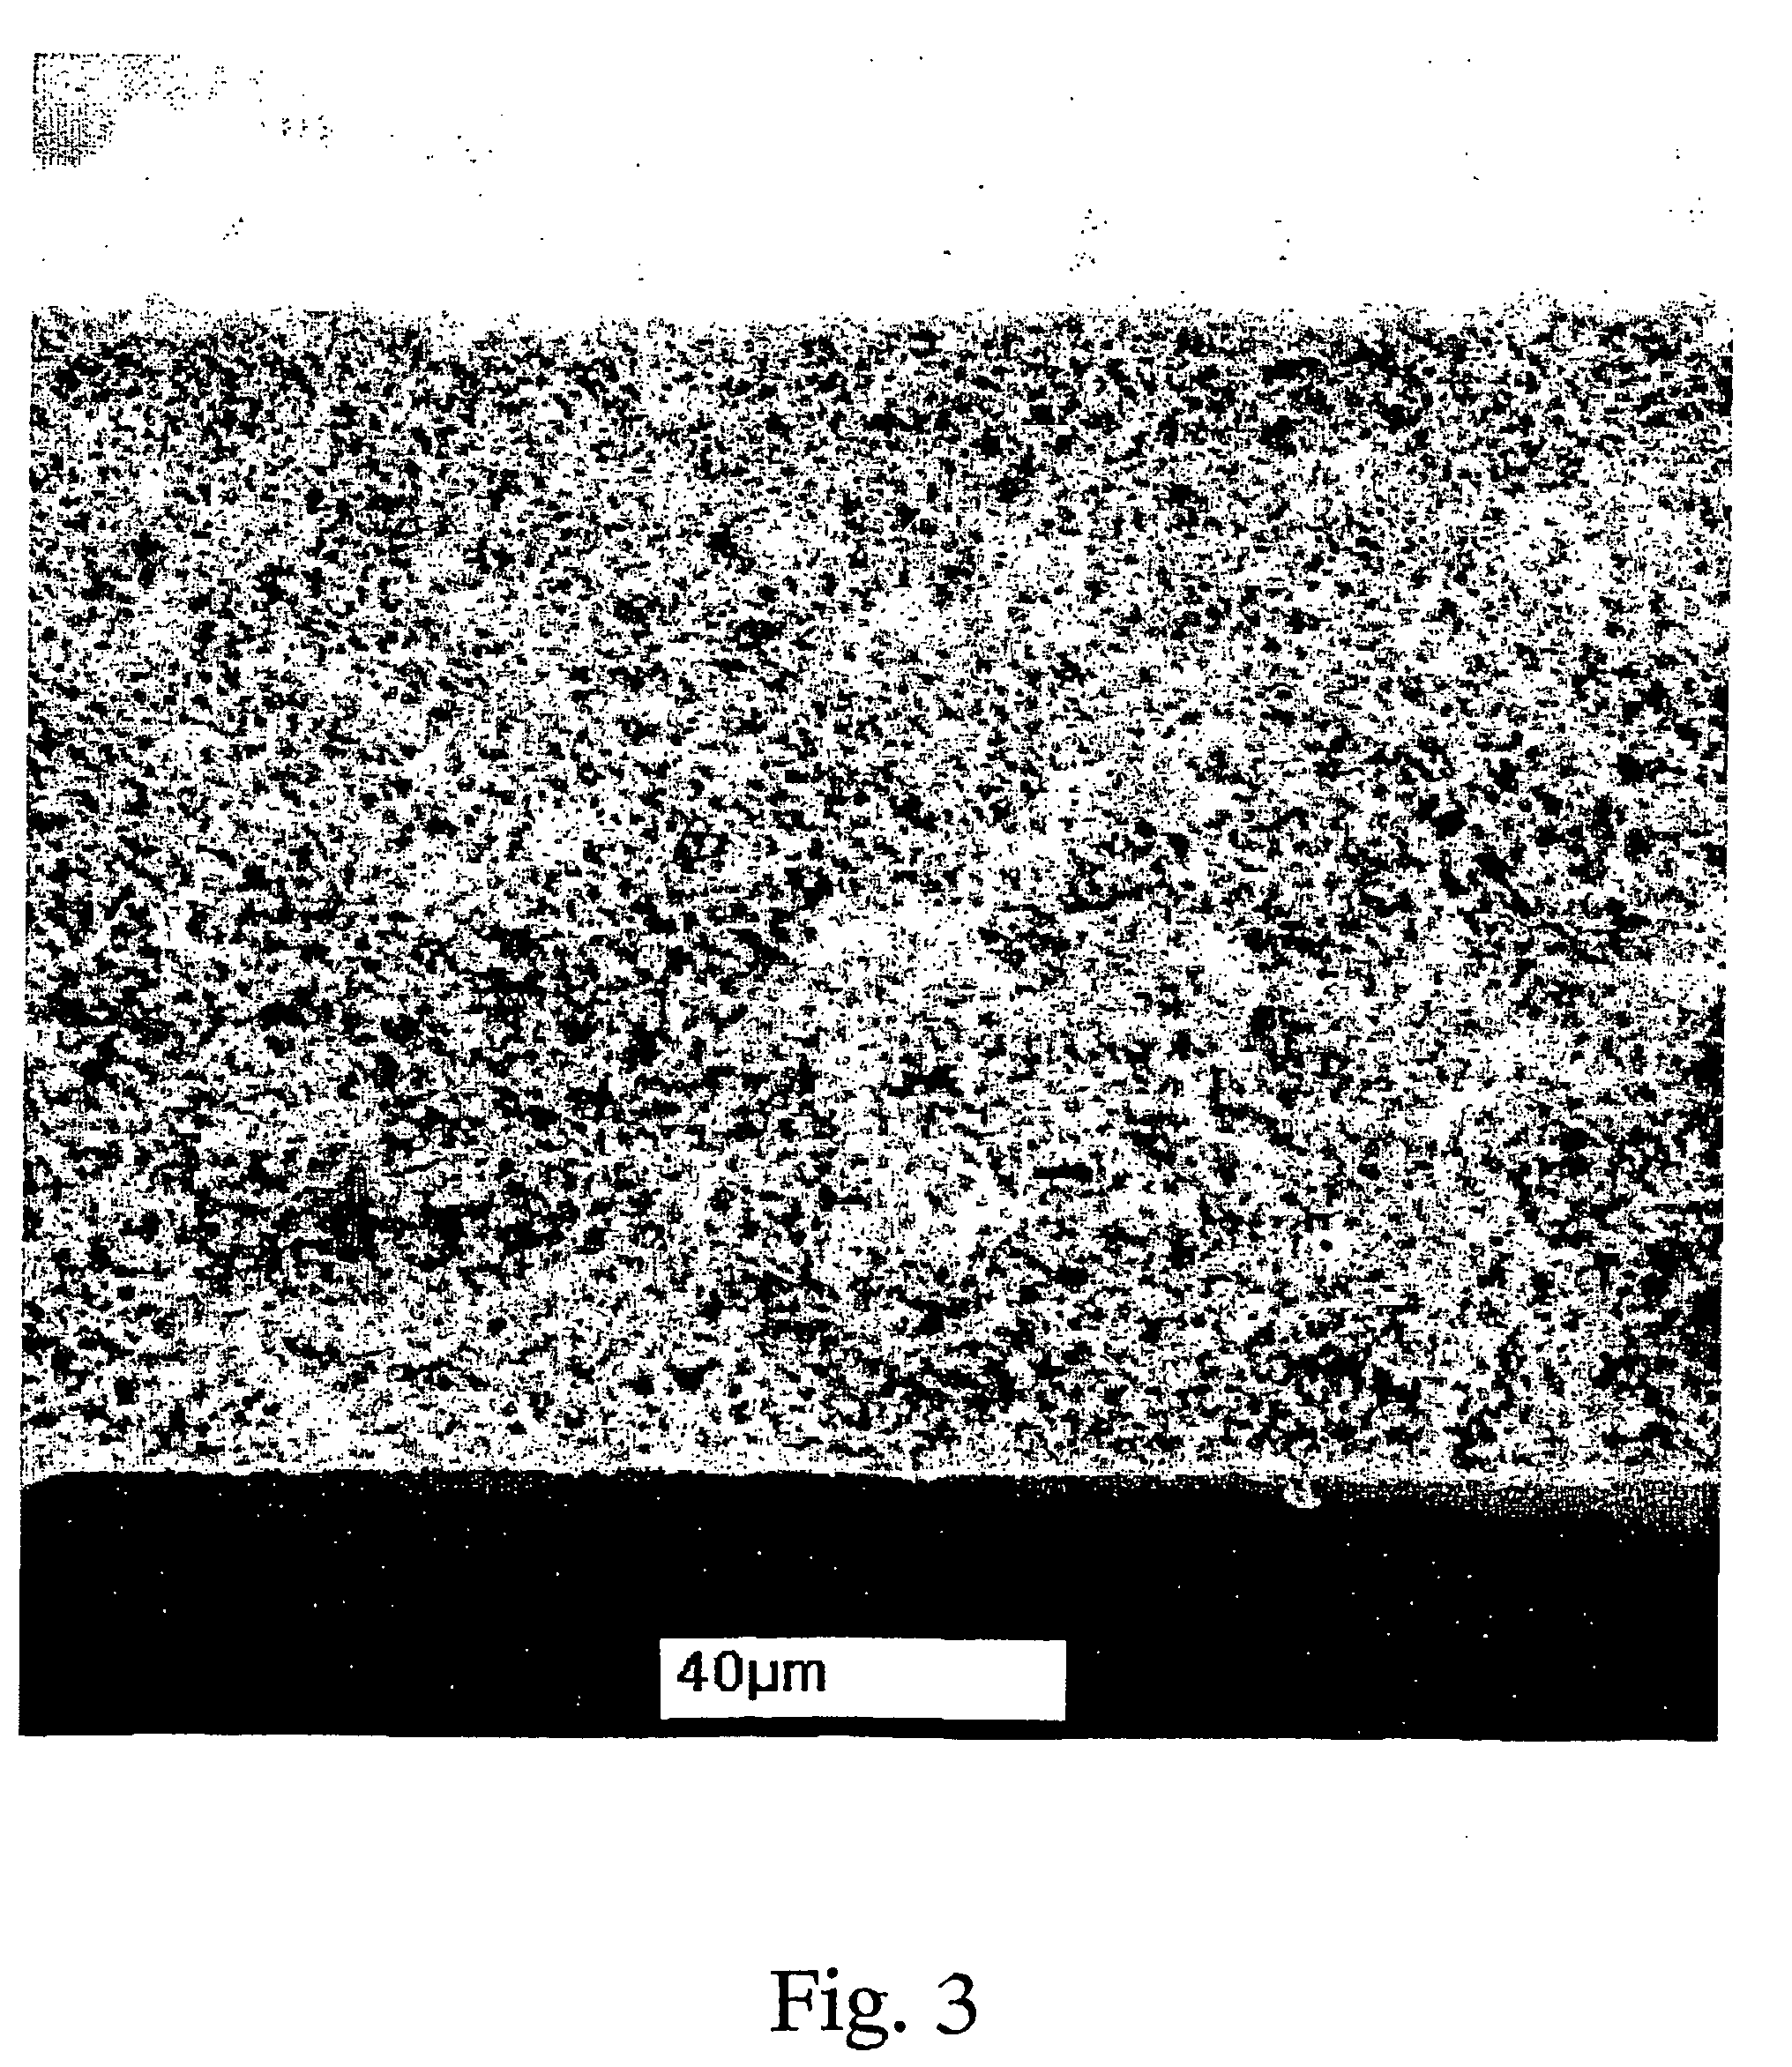 Method of manufacturing membranes and the resulting membranes